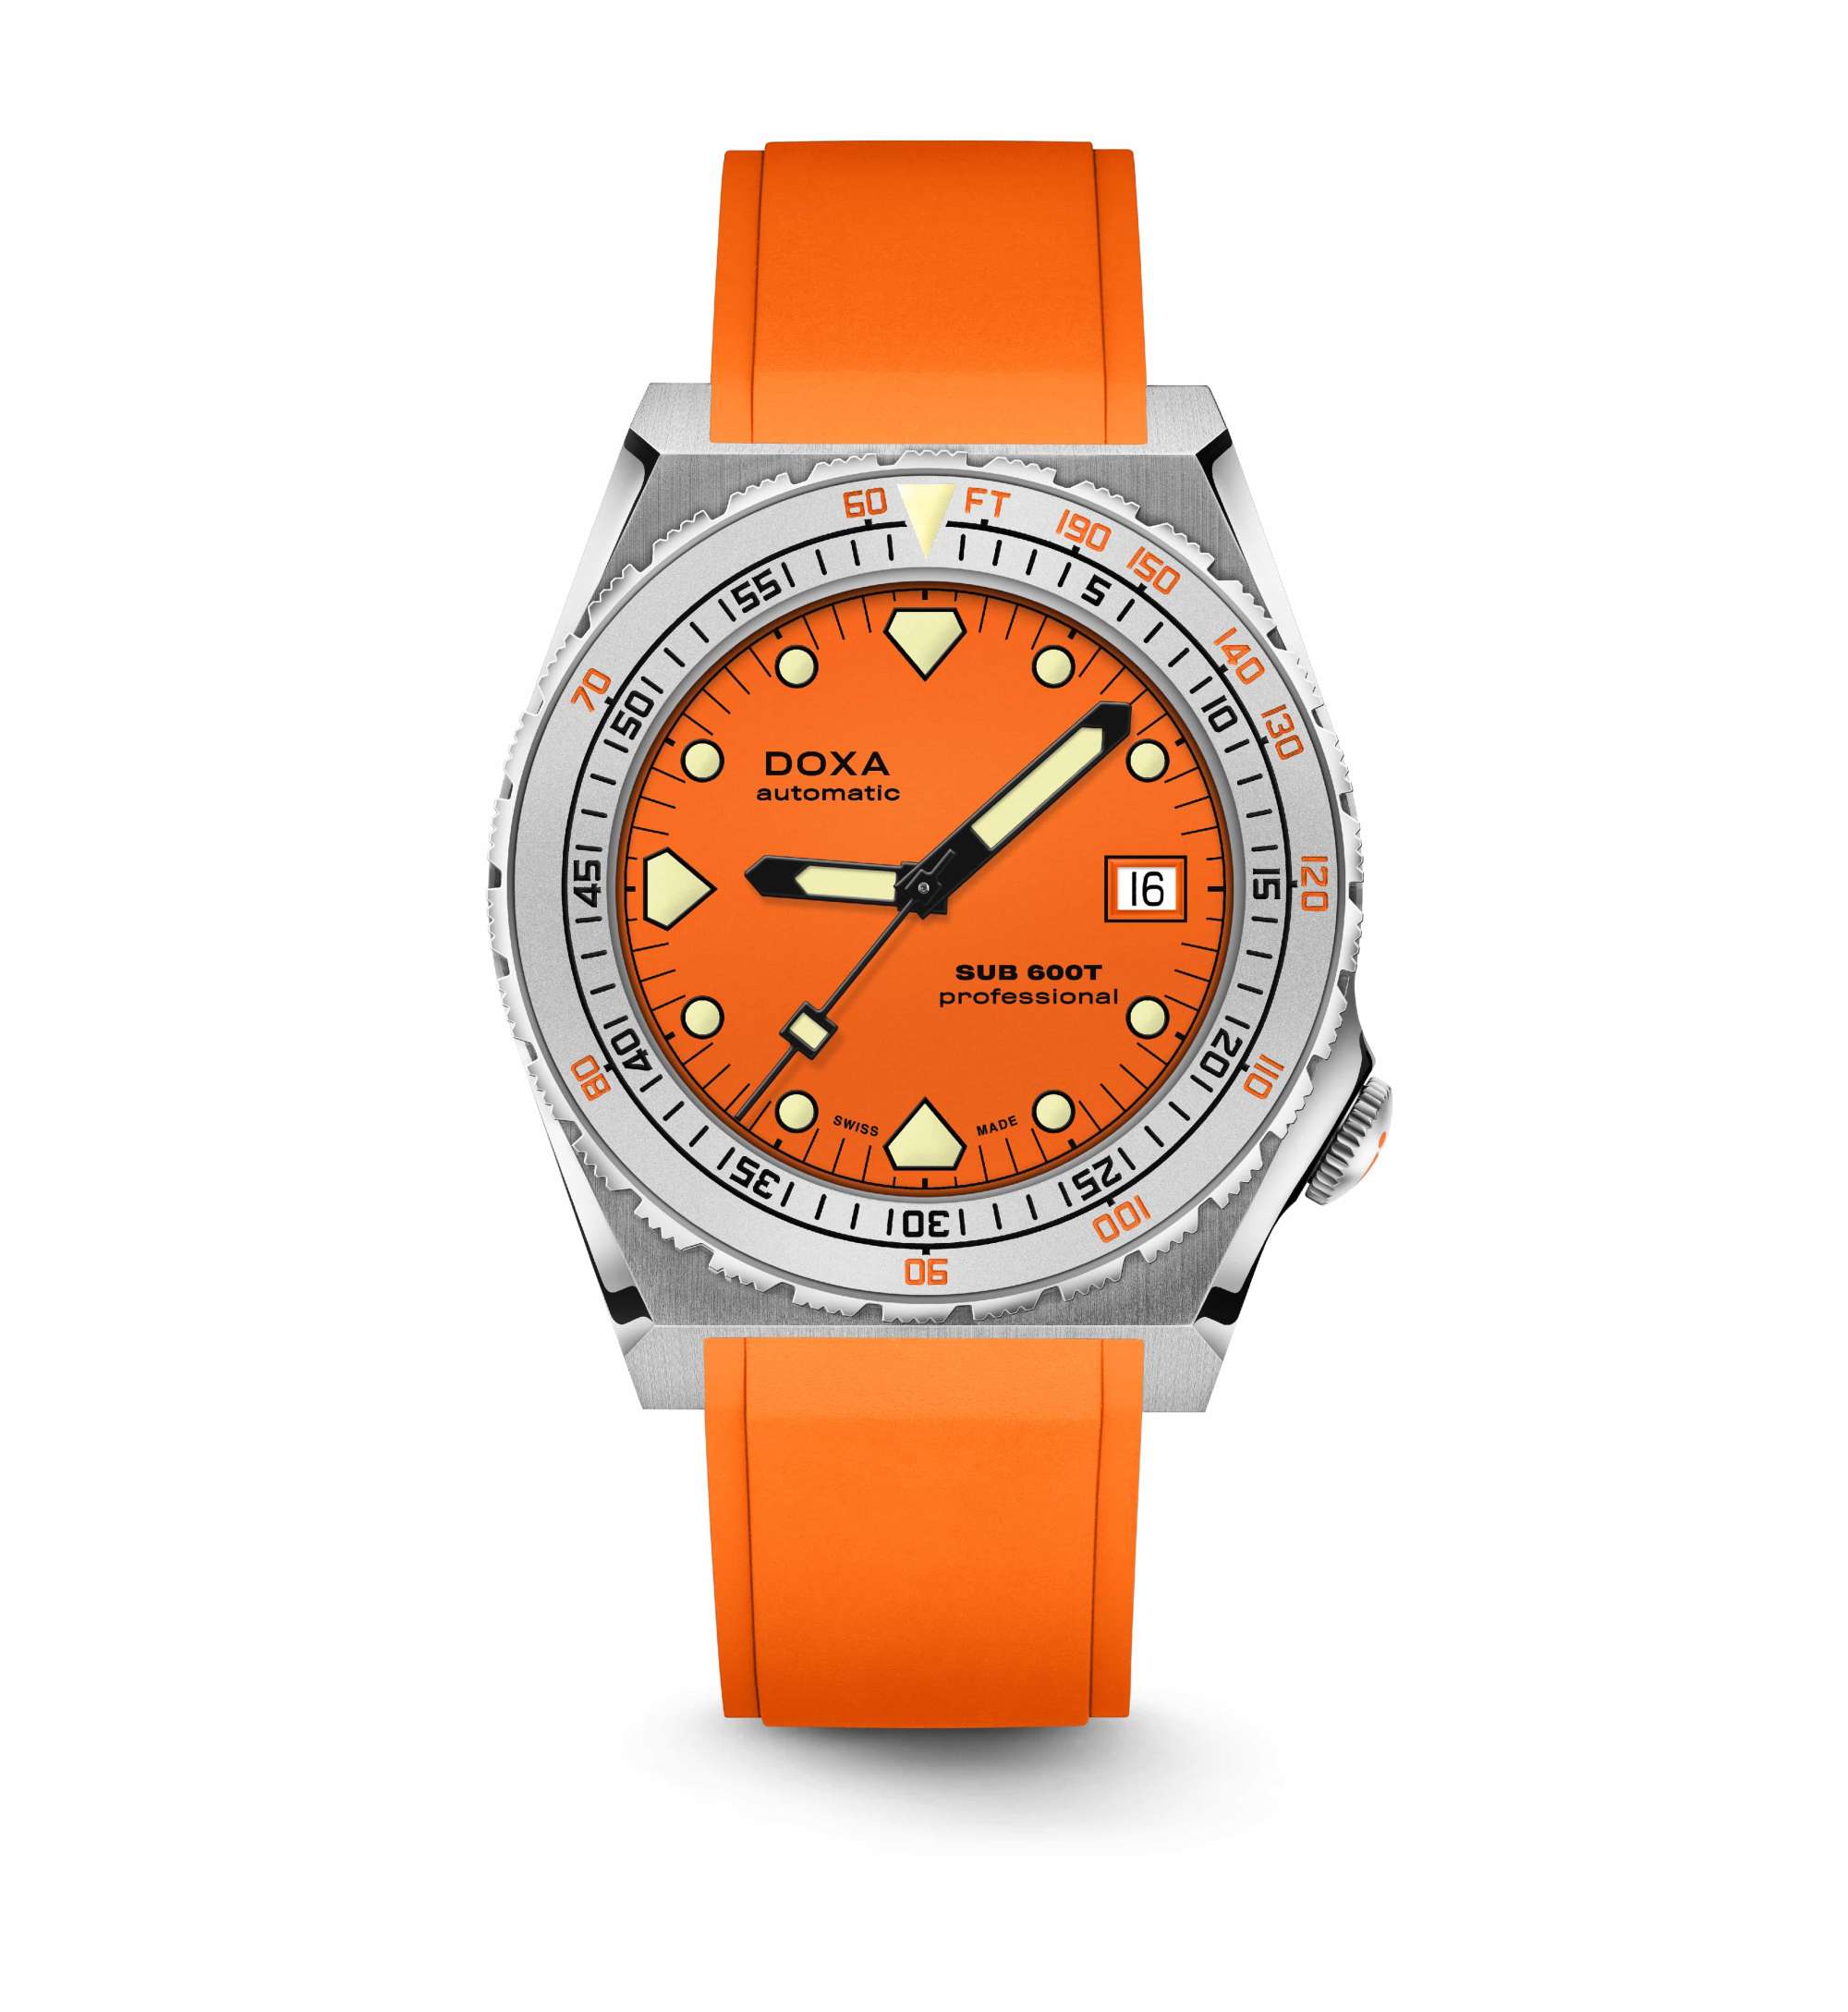 DOXA SUB 600T Professional Stainless Steel 862-10-351-21 – Swiss Time